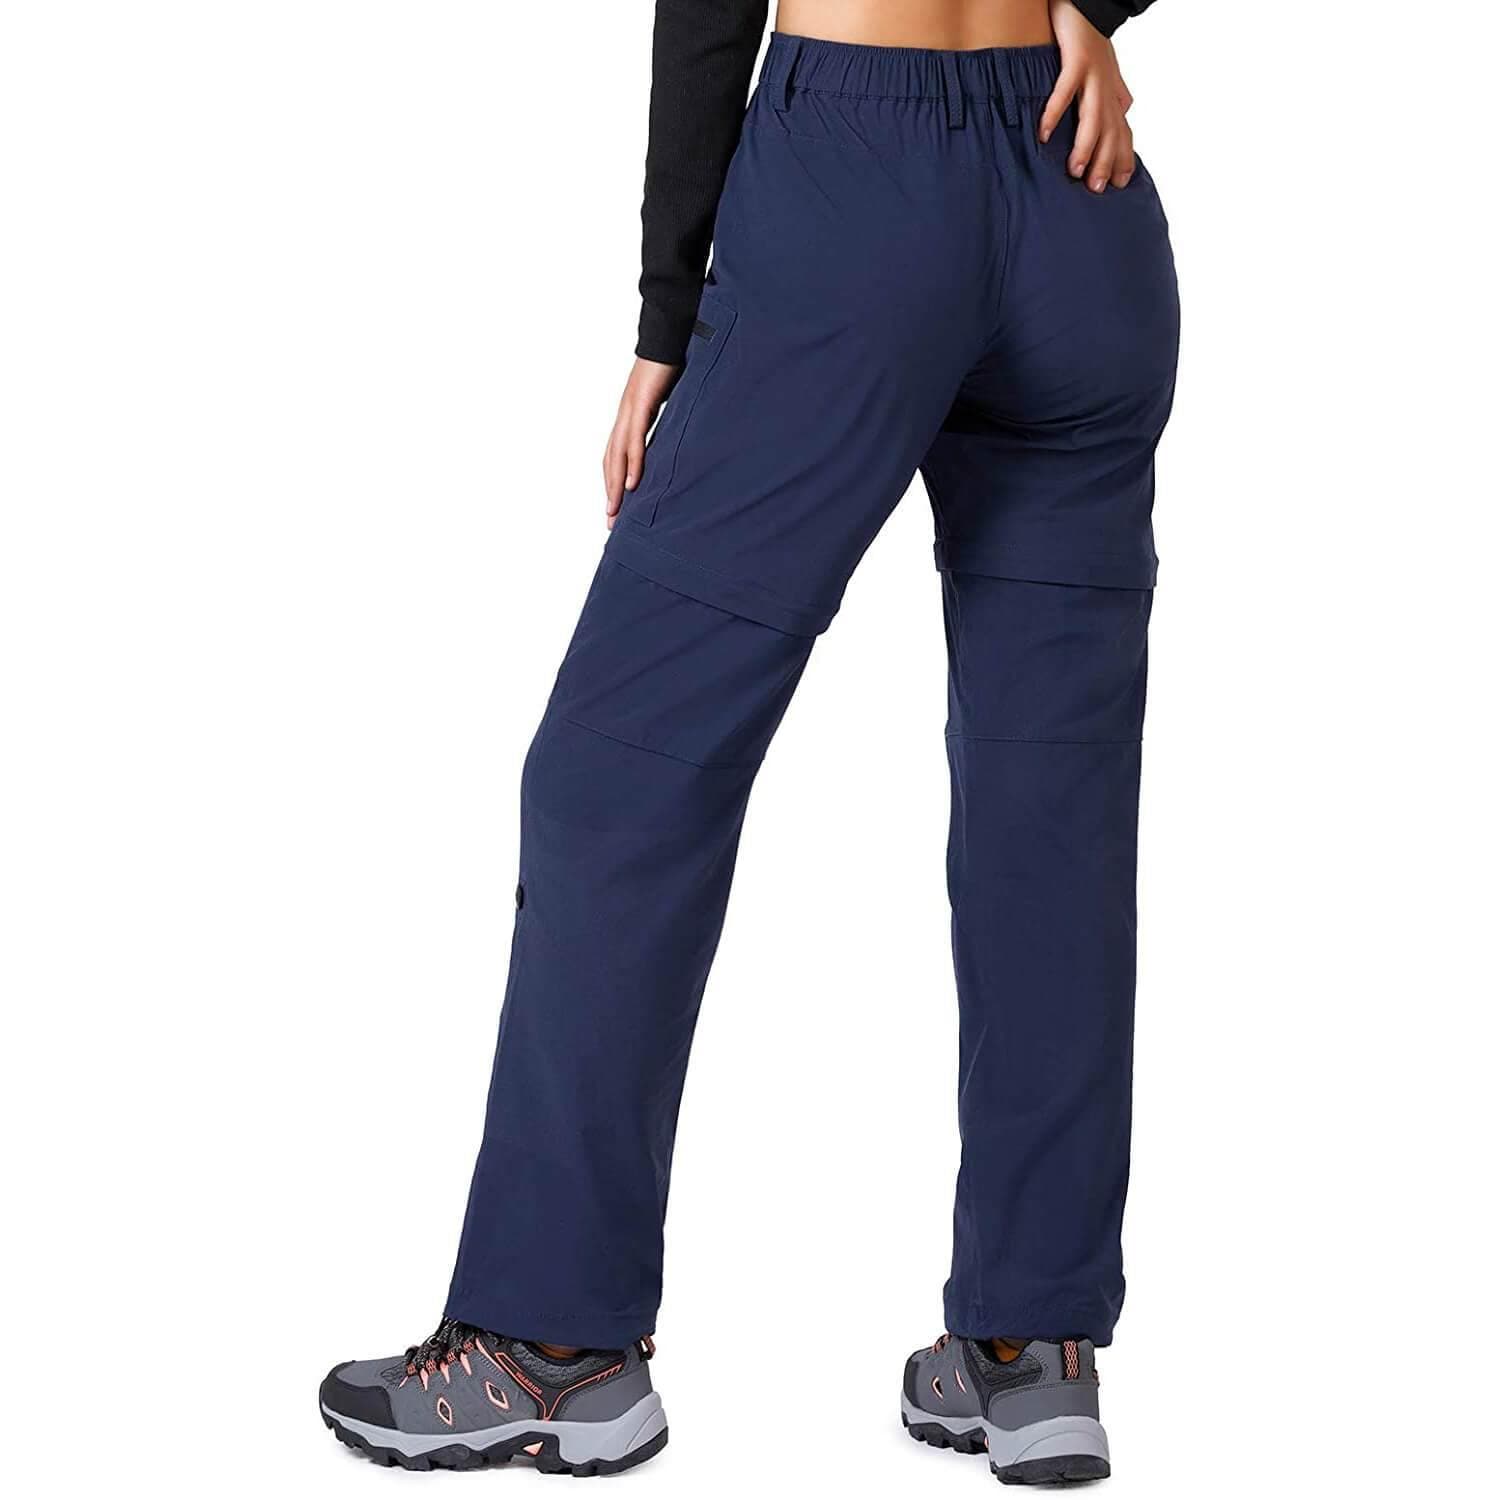 Woods Women's Warden Convertible Pants, Hiking, Outdoor, Mid Rise, Stretch